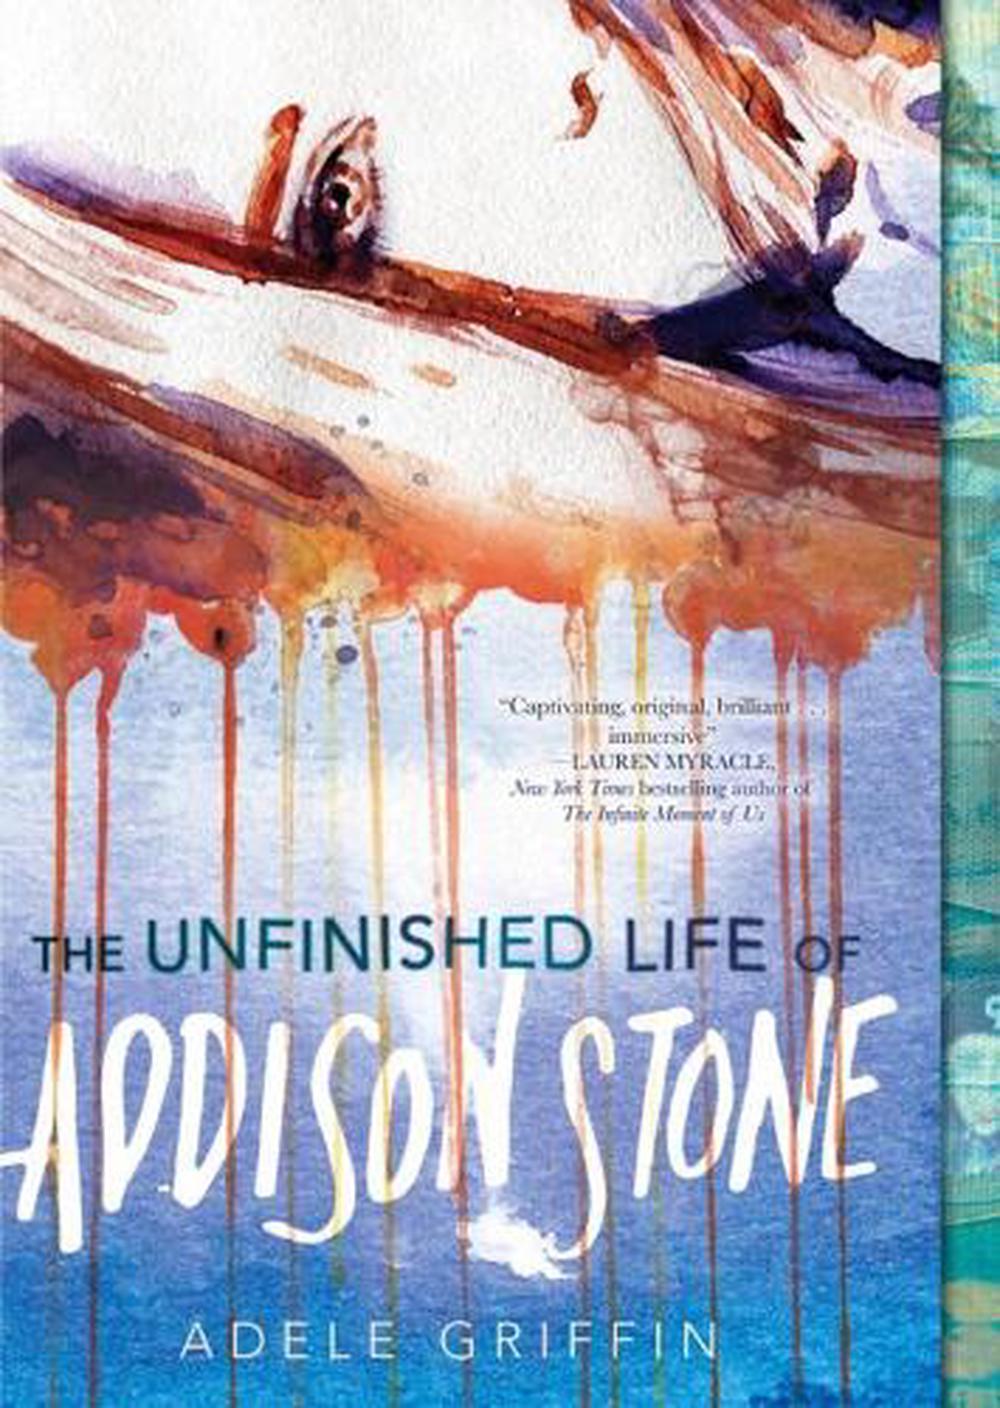 the unfinished life of addison stone by adele griffin